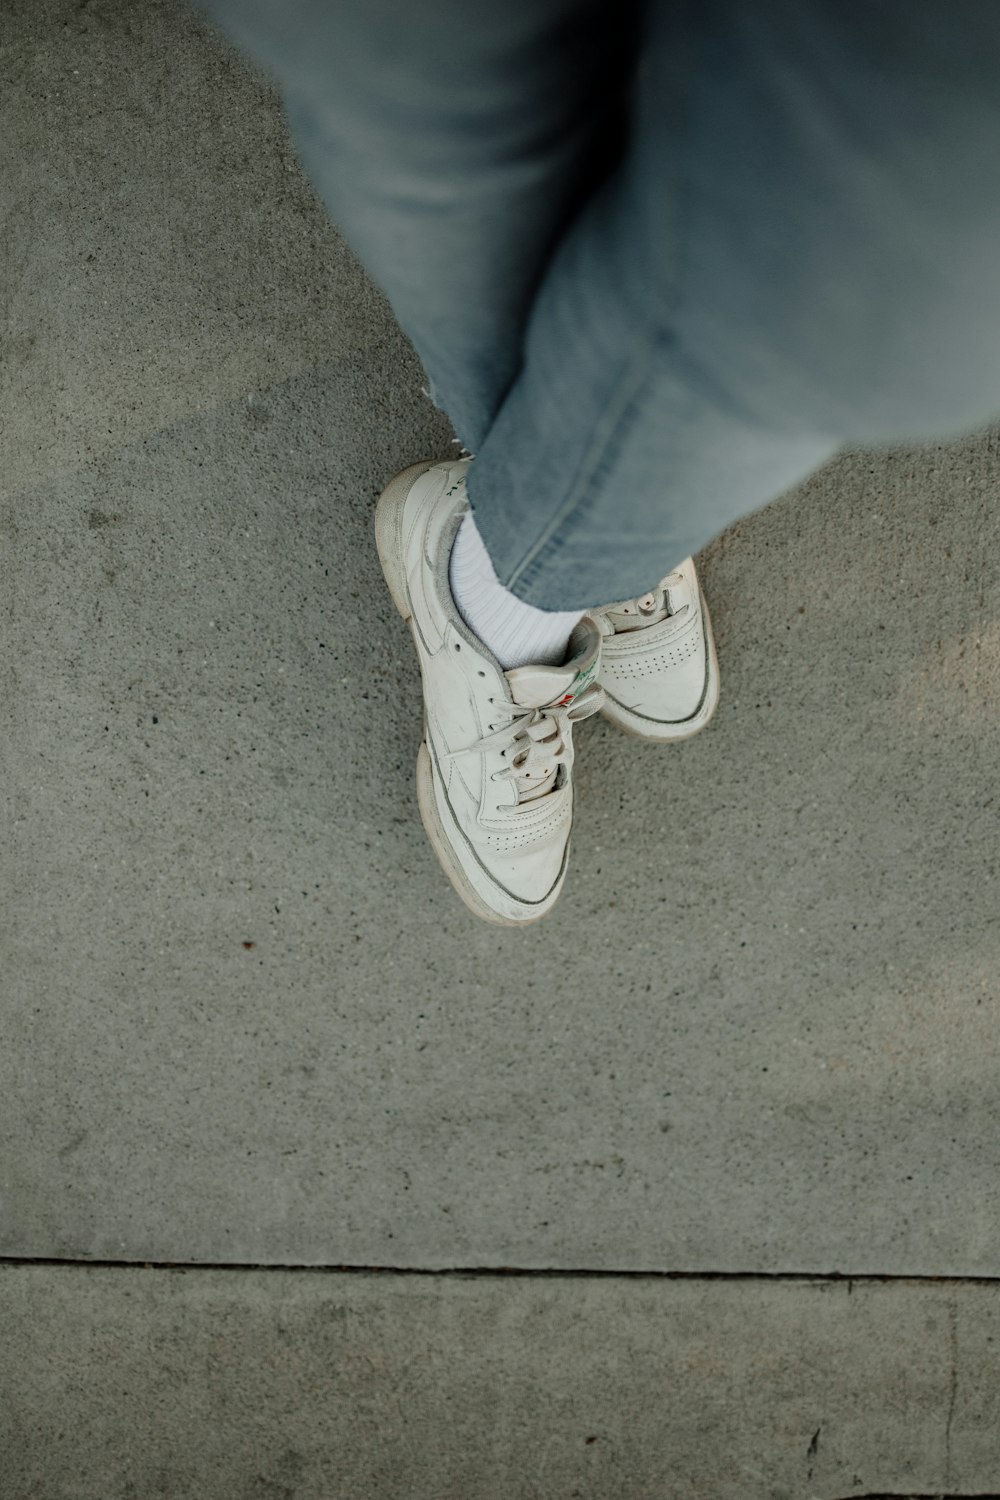 a person standing on a sidewalk wearing white shoes